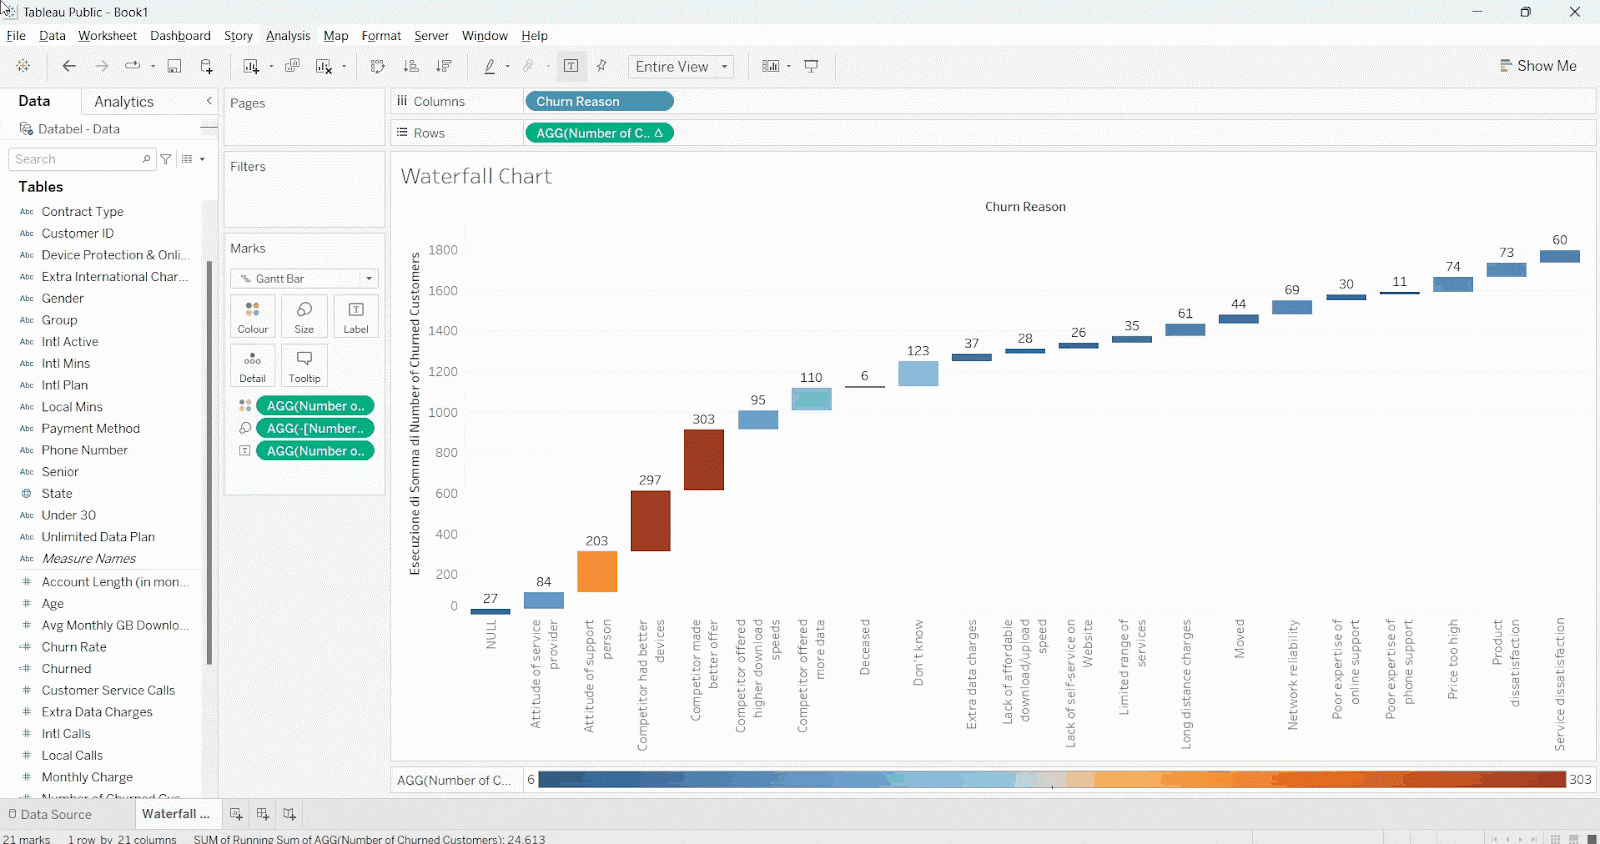 how to add a summary bar in a chart in Tableau